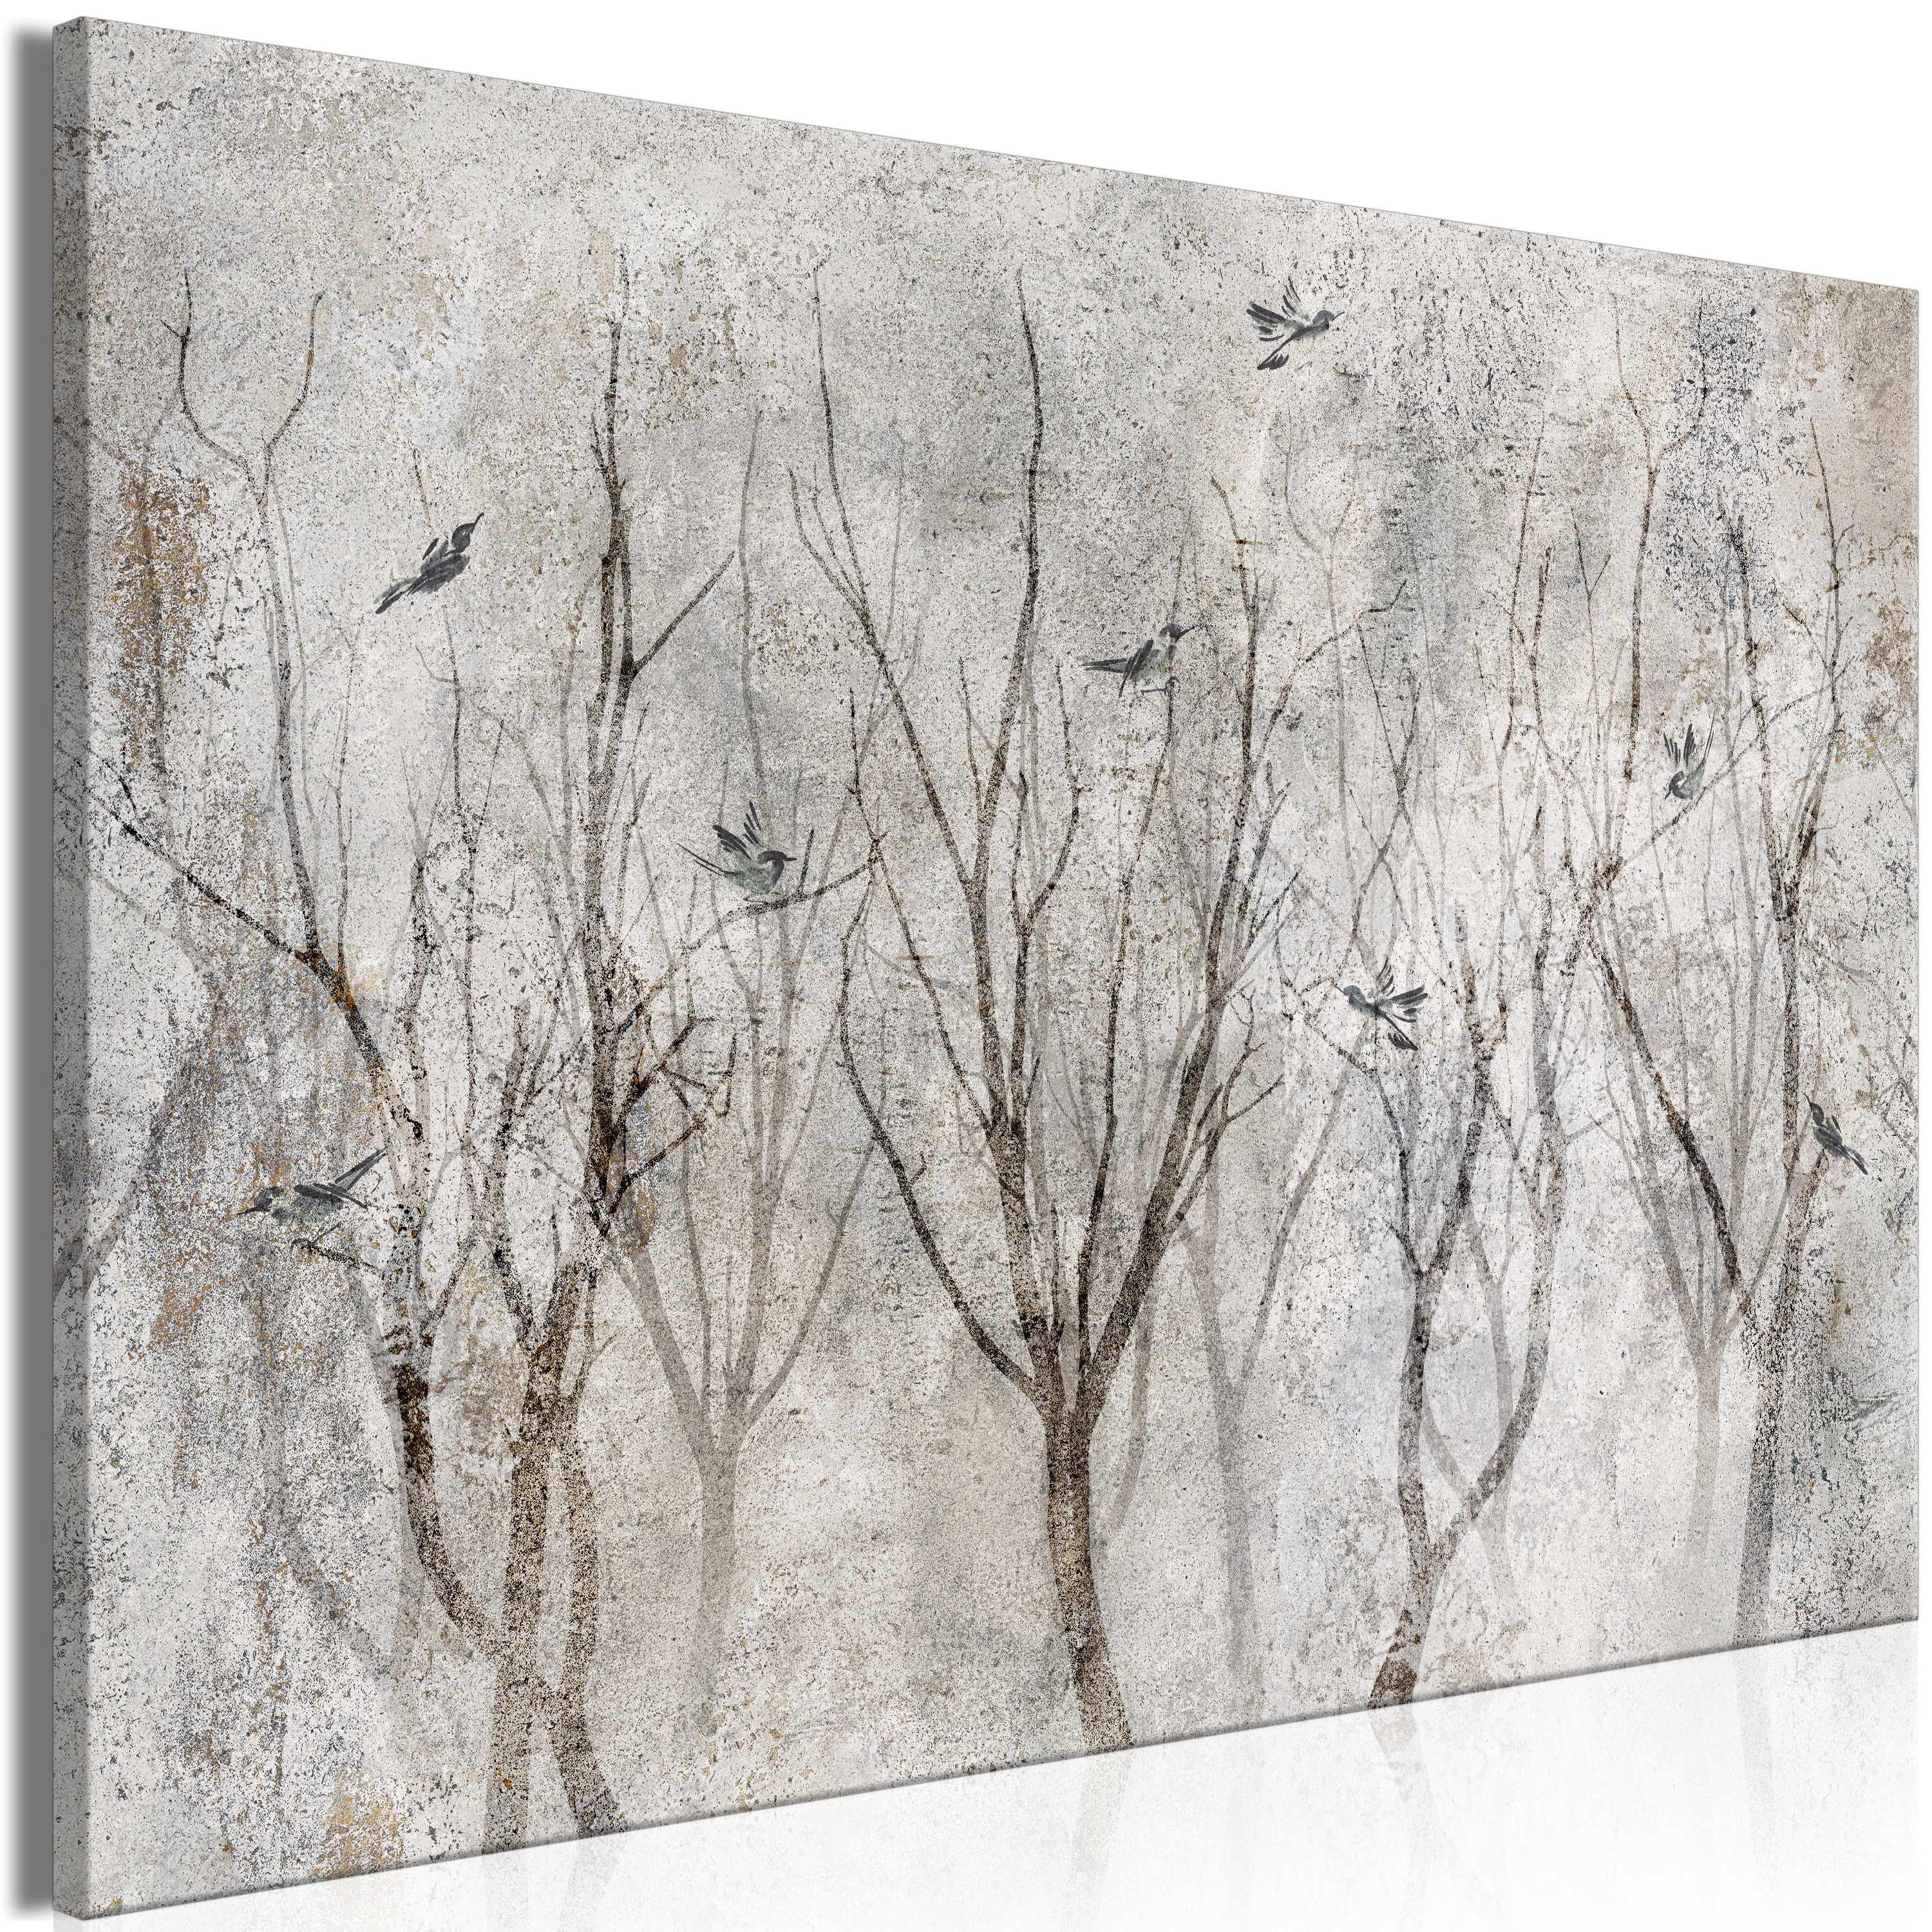 Canvas Print - Singing in the Forest (1 Part) Wide - 120x80